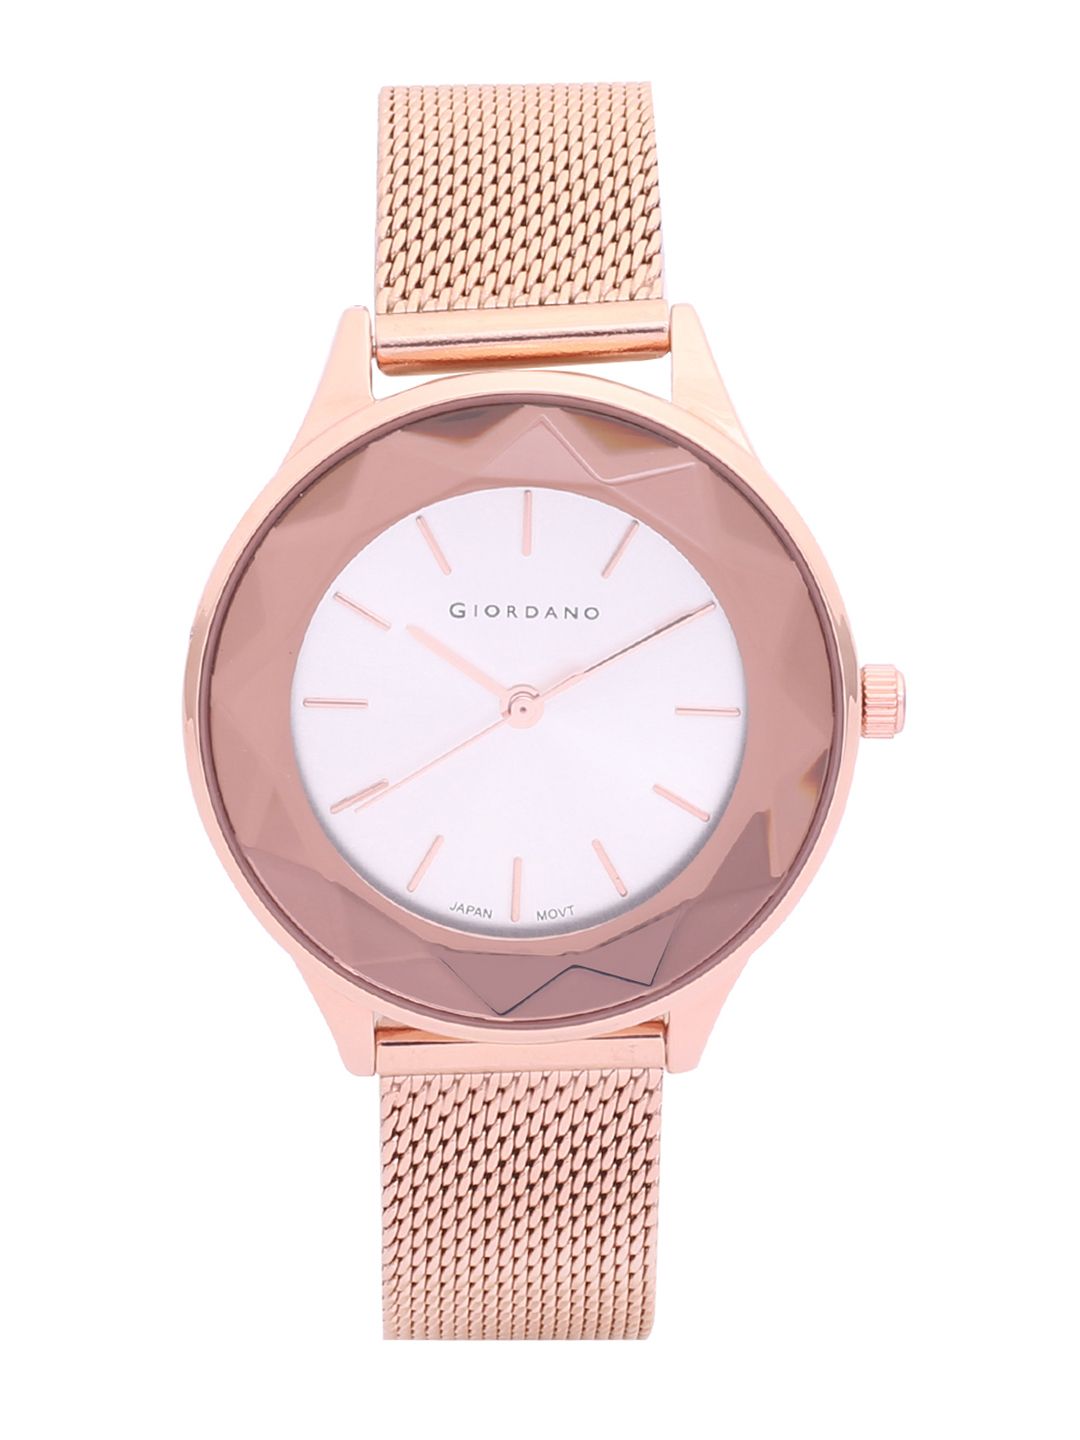 GIORDANO Women Rose Gold Analogue Watch C2087 Price in India